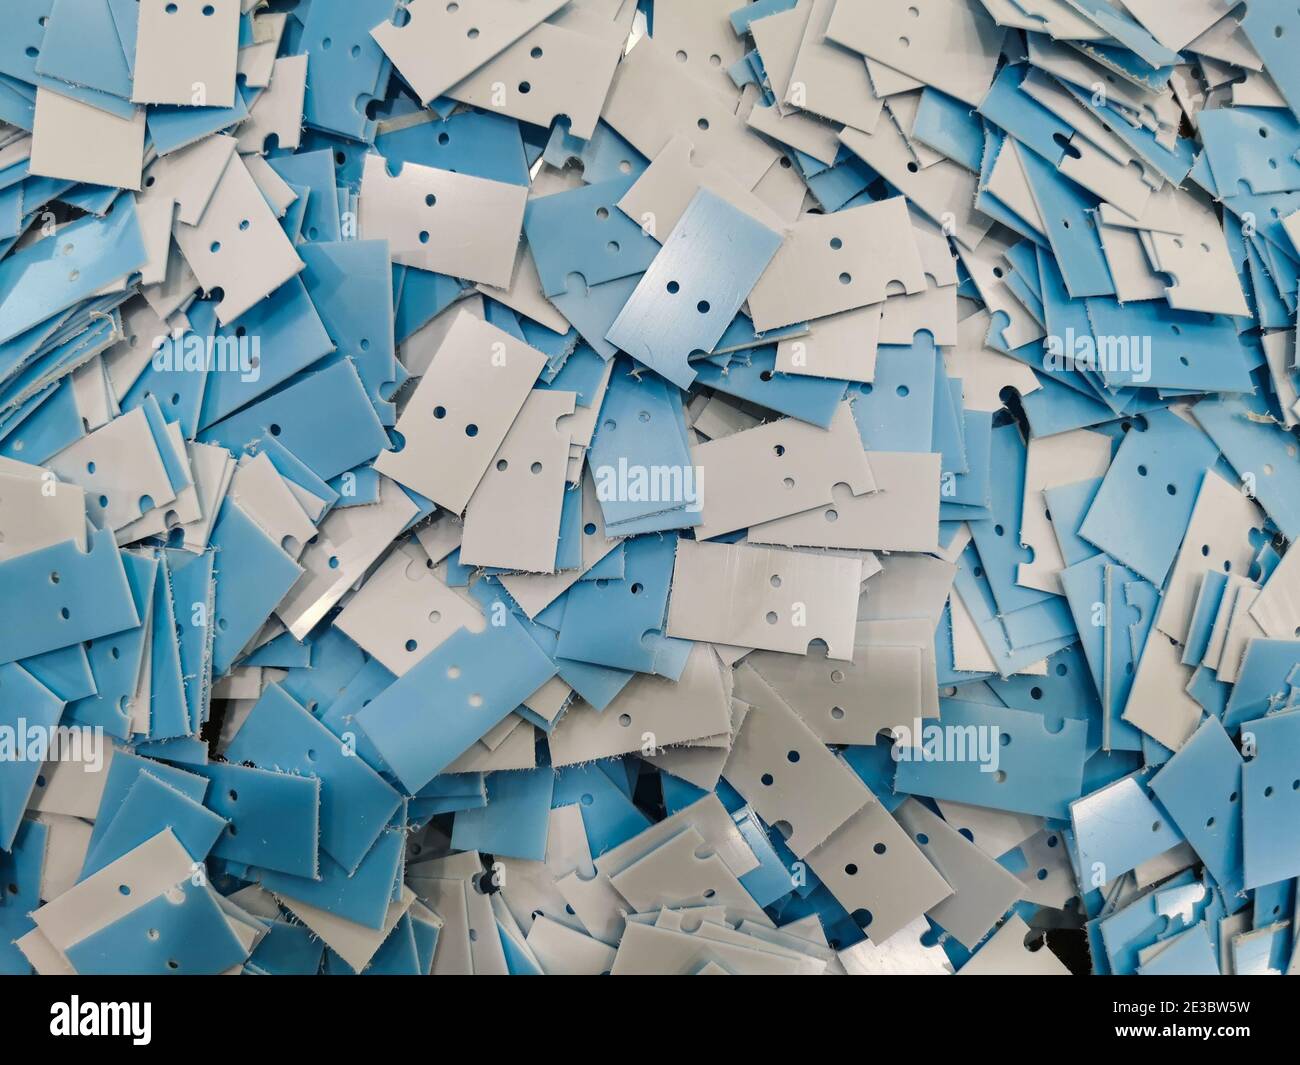 Bunch of white and blue plastic manufactured bits Stock Photo